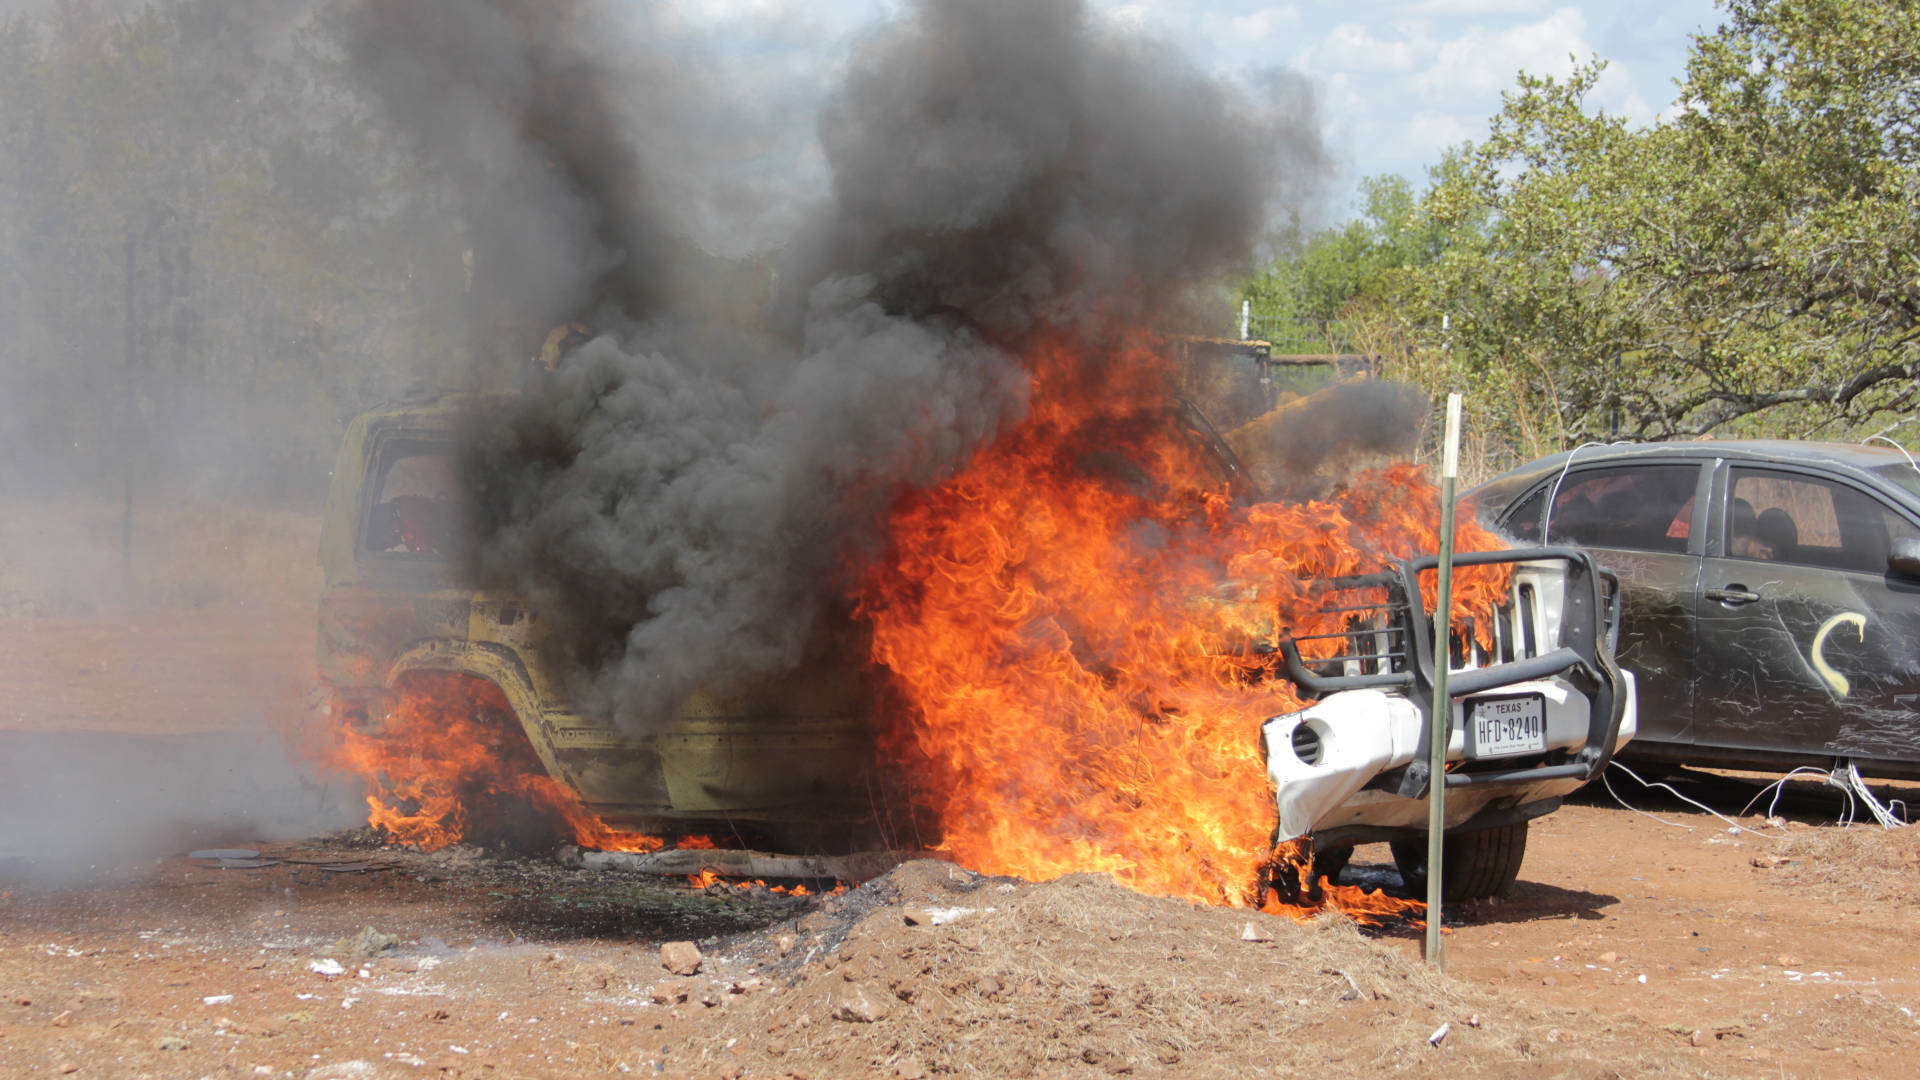 A Jeep engulfed in flames at the Forensic Anthropology Center in San Marcos, run by Texas State University, which hosts an annual course uniting two rapidly evolving fields: fire dynamics and anthropology.